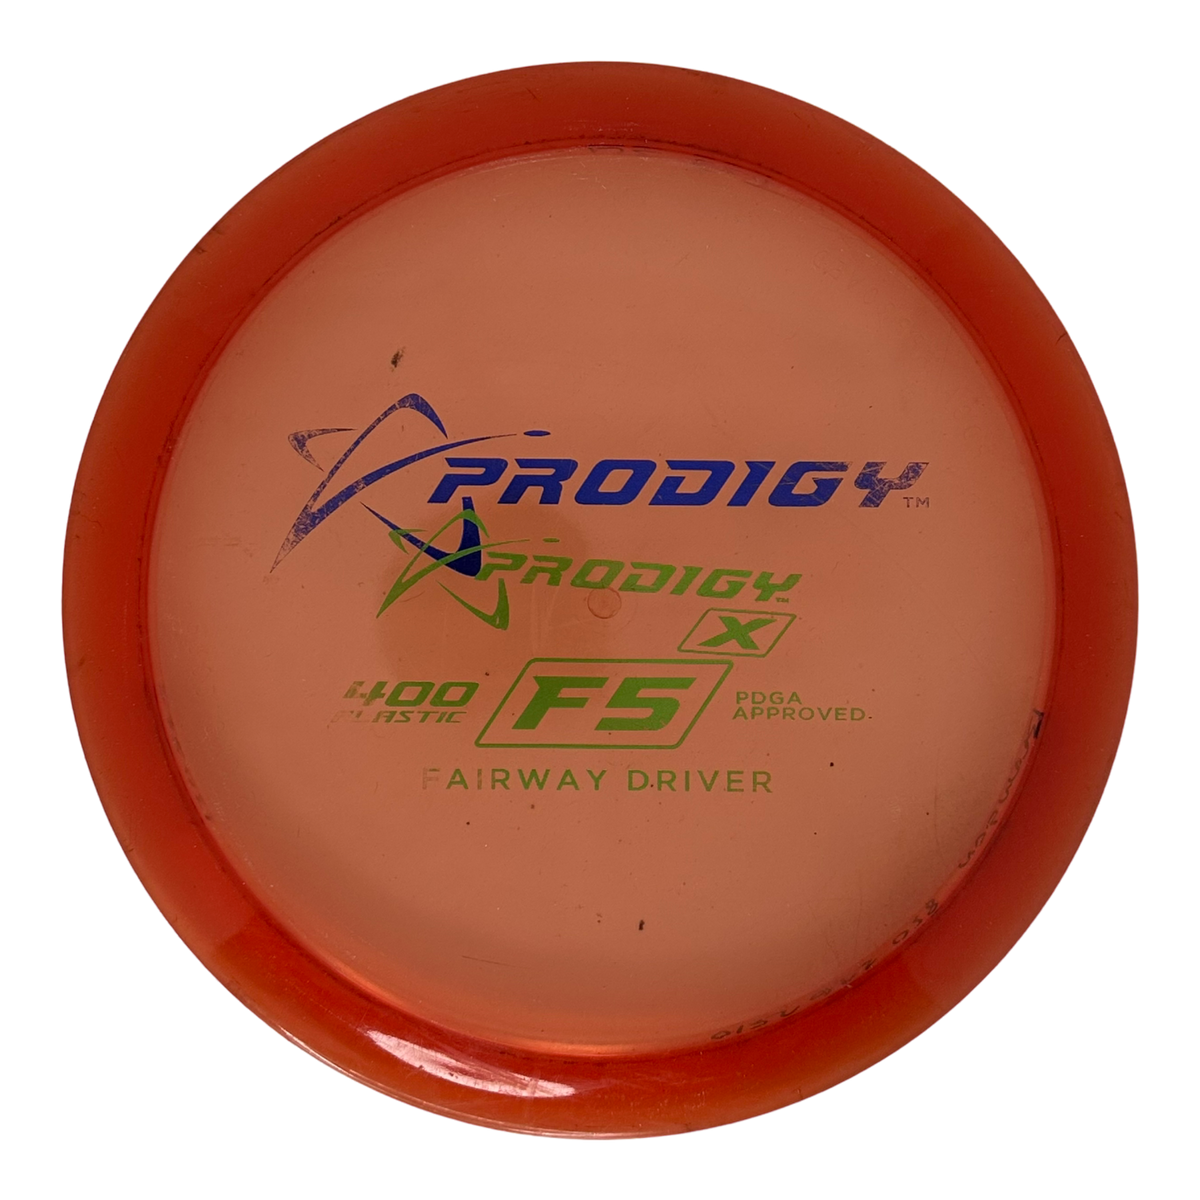 Prodigy Pre-Owned Fairway Drivers